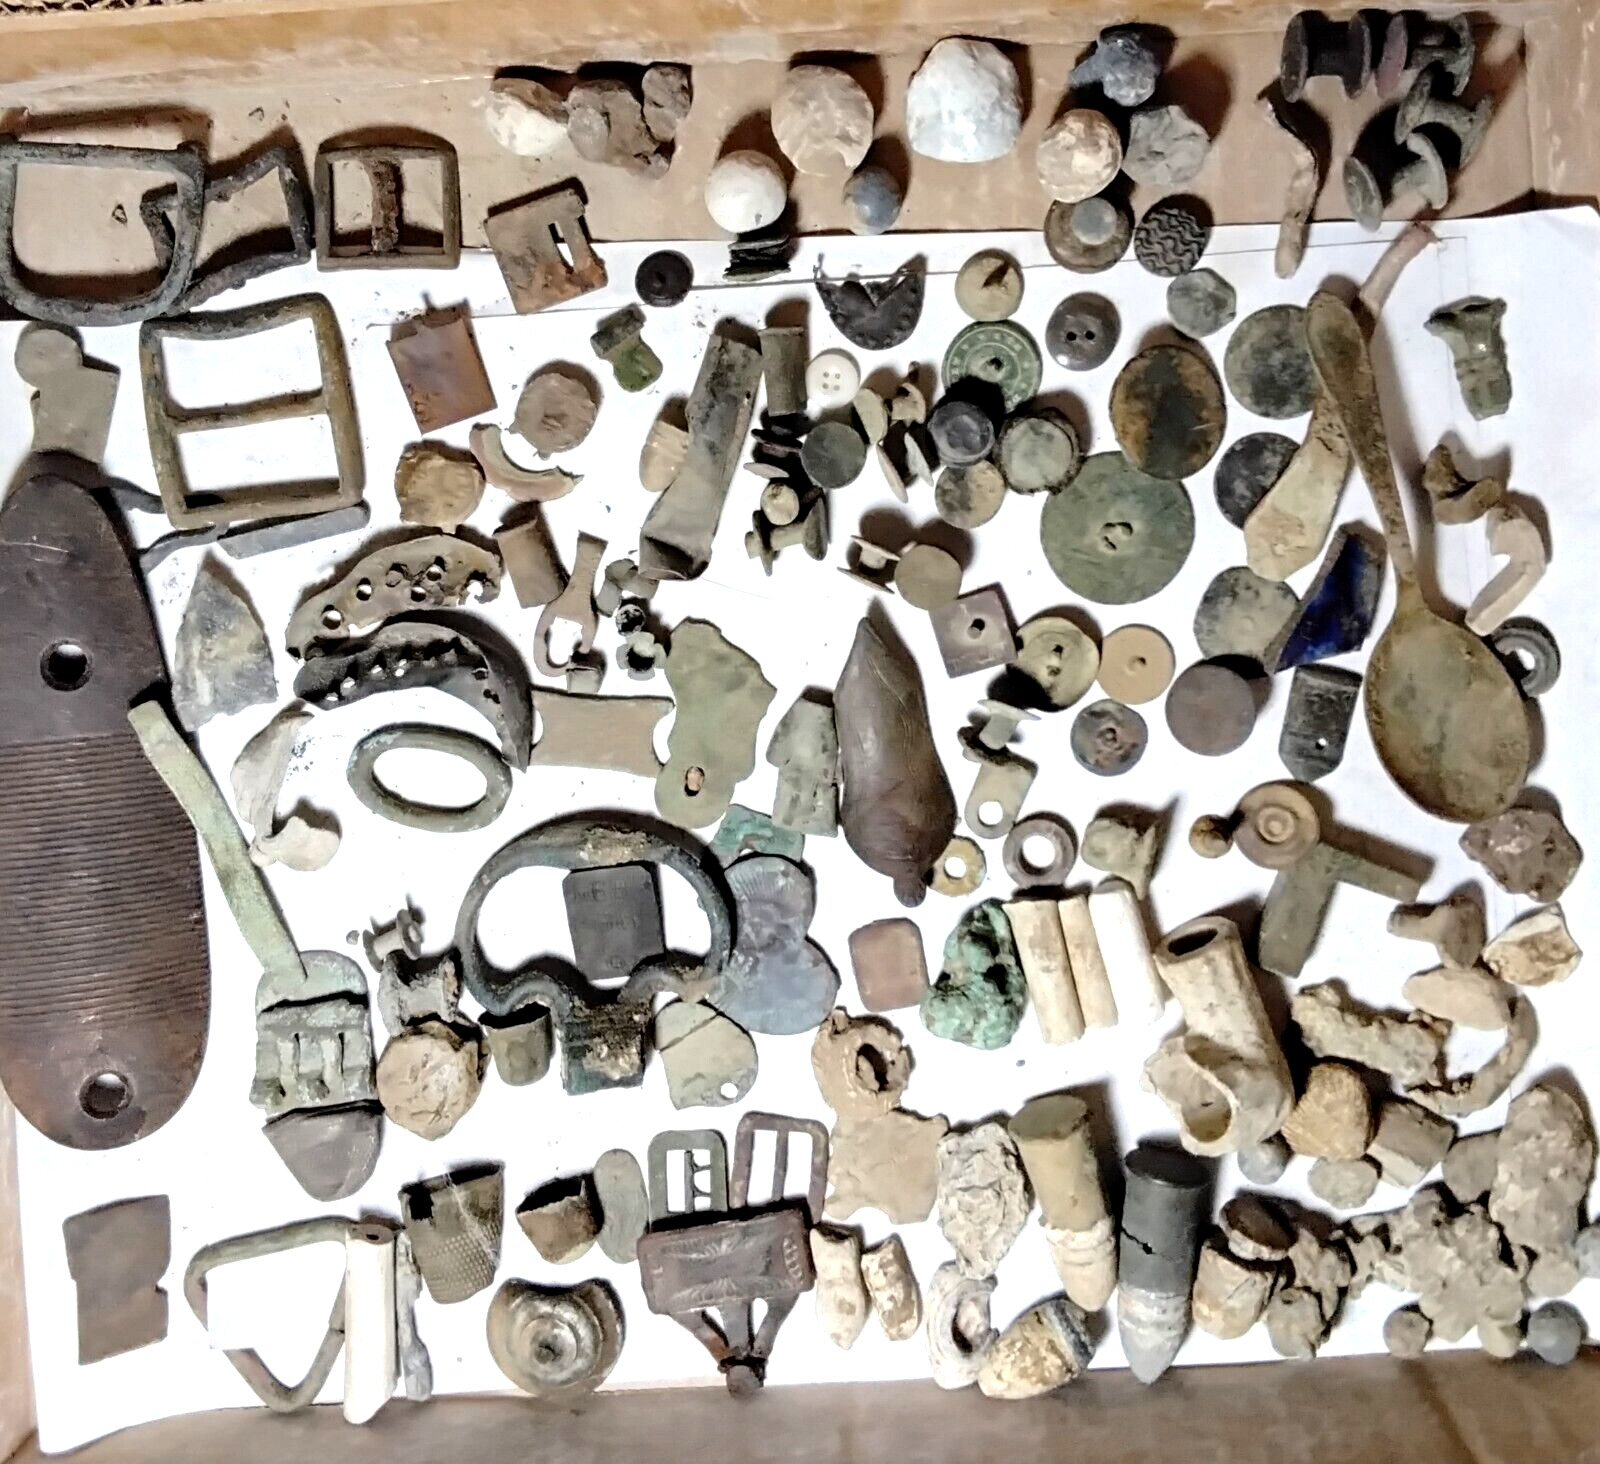 100+ Civil War Relics dug in Central Virginia, buy it now for $38.00 + $13.00 S